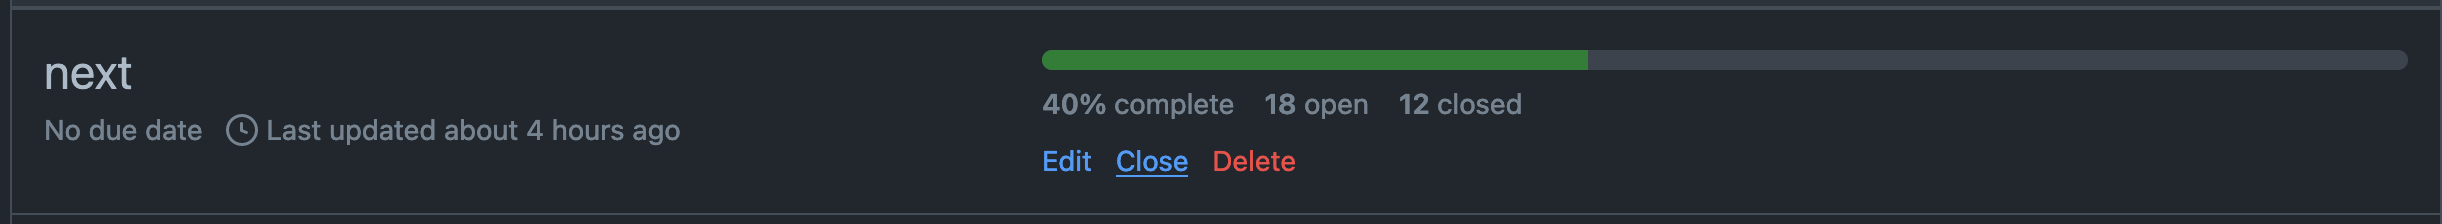 The next milestone, which has a "closed" button